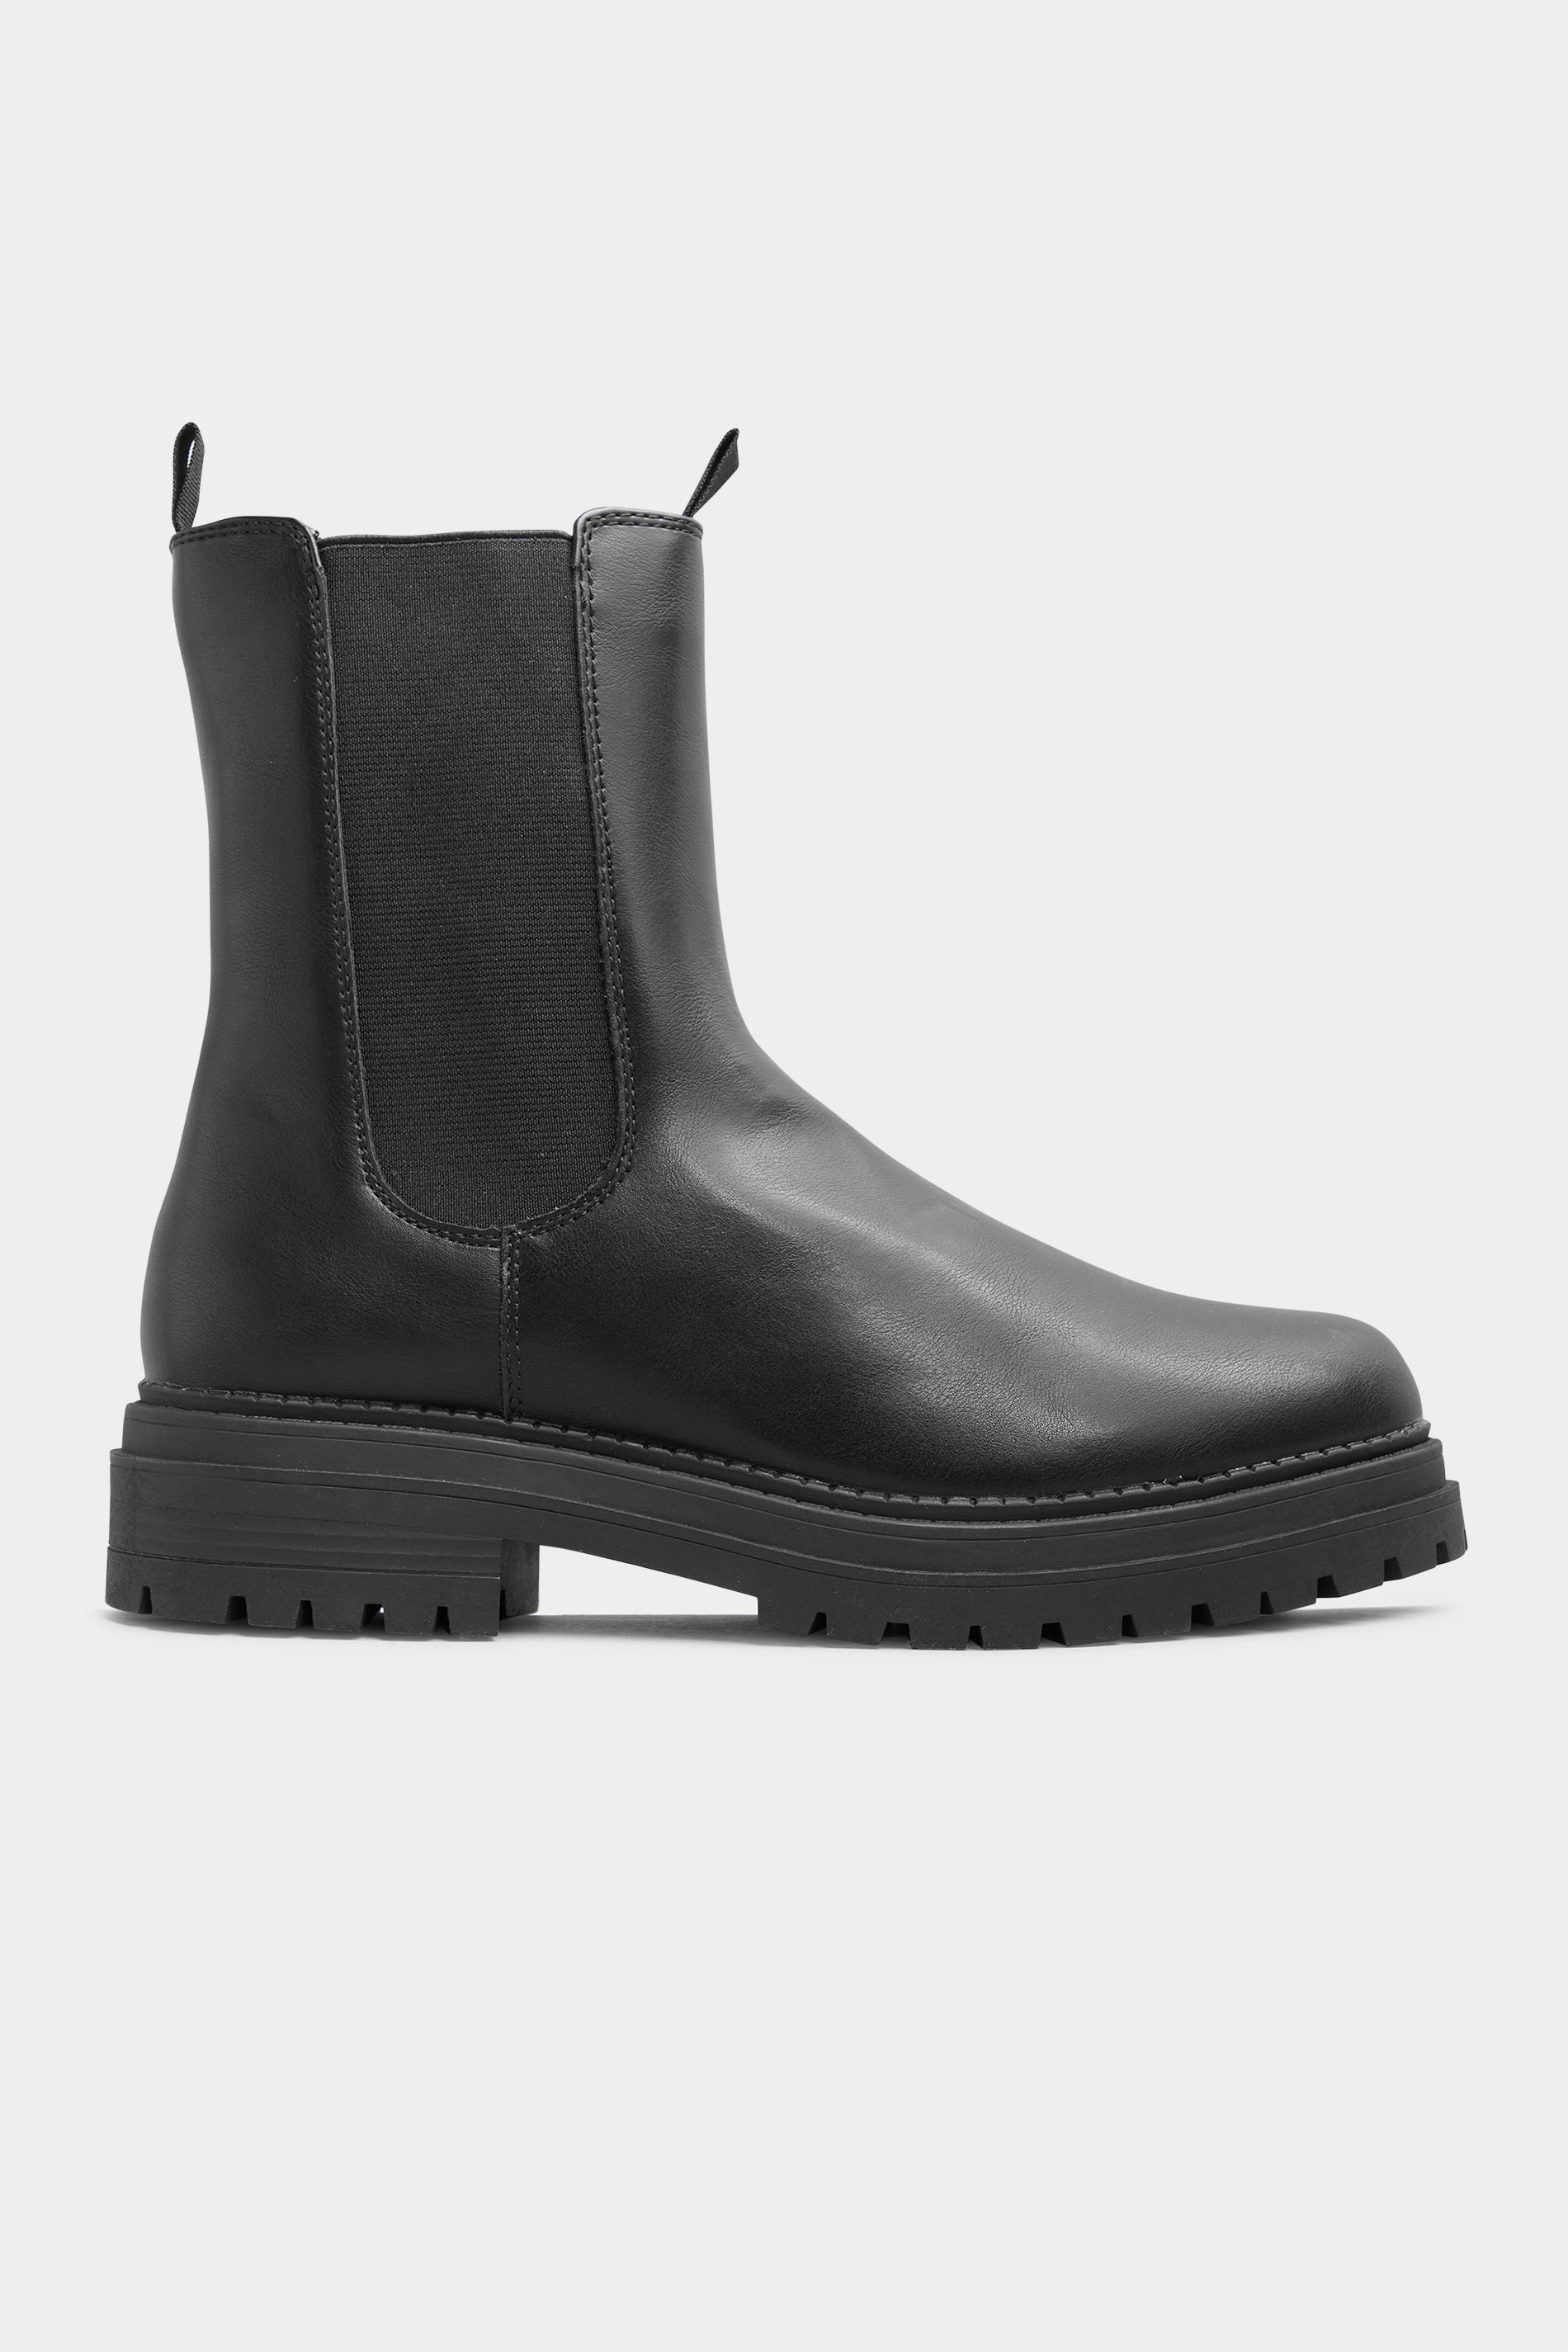 LIMITED COLLECTION Black Leather Look Chunky High Chelsea Boots In ...